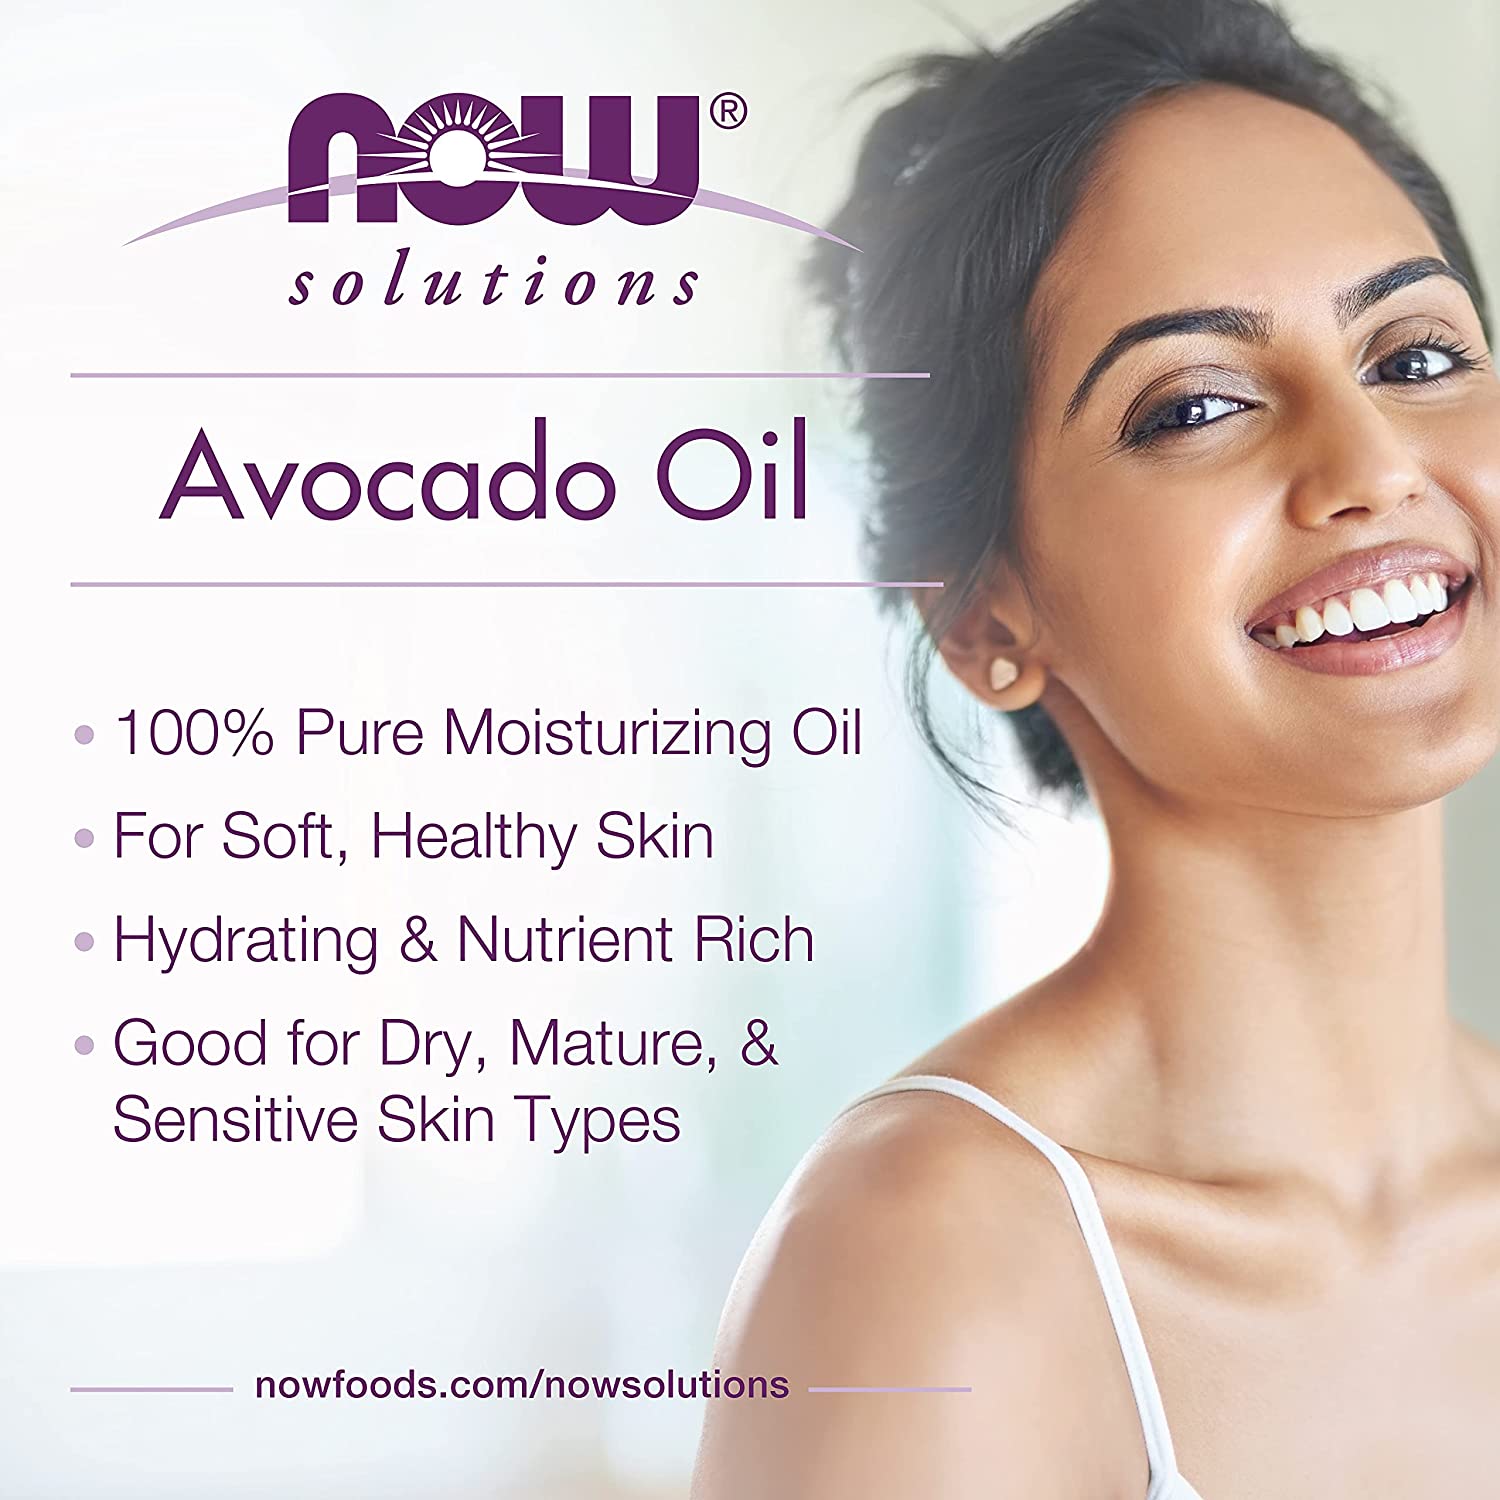 now-solutions-avocado-oil-100-pure-118ml